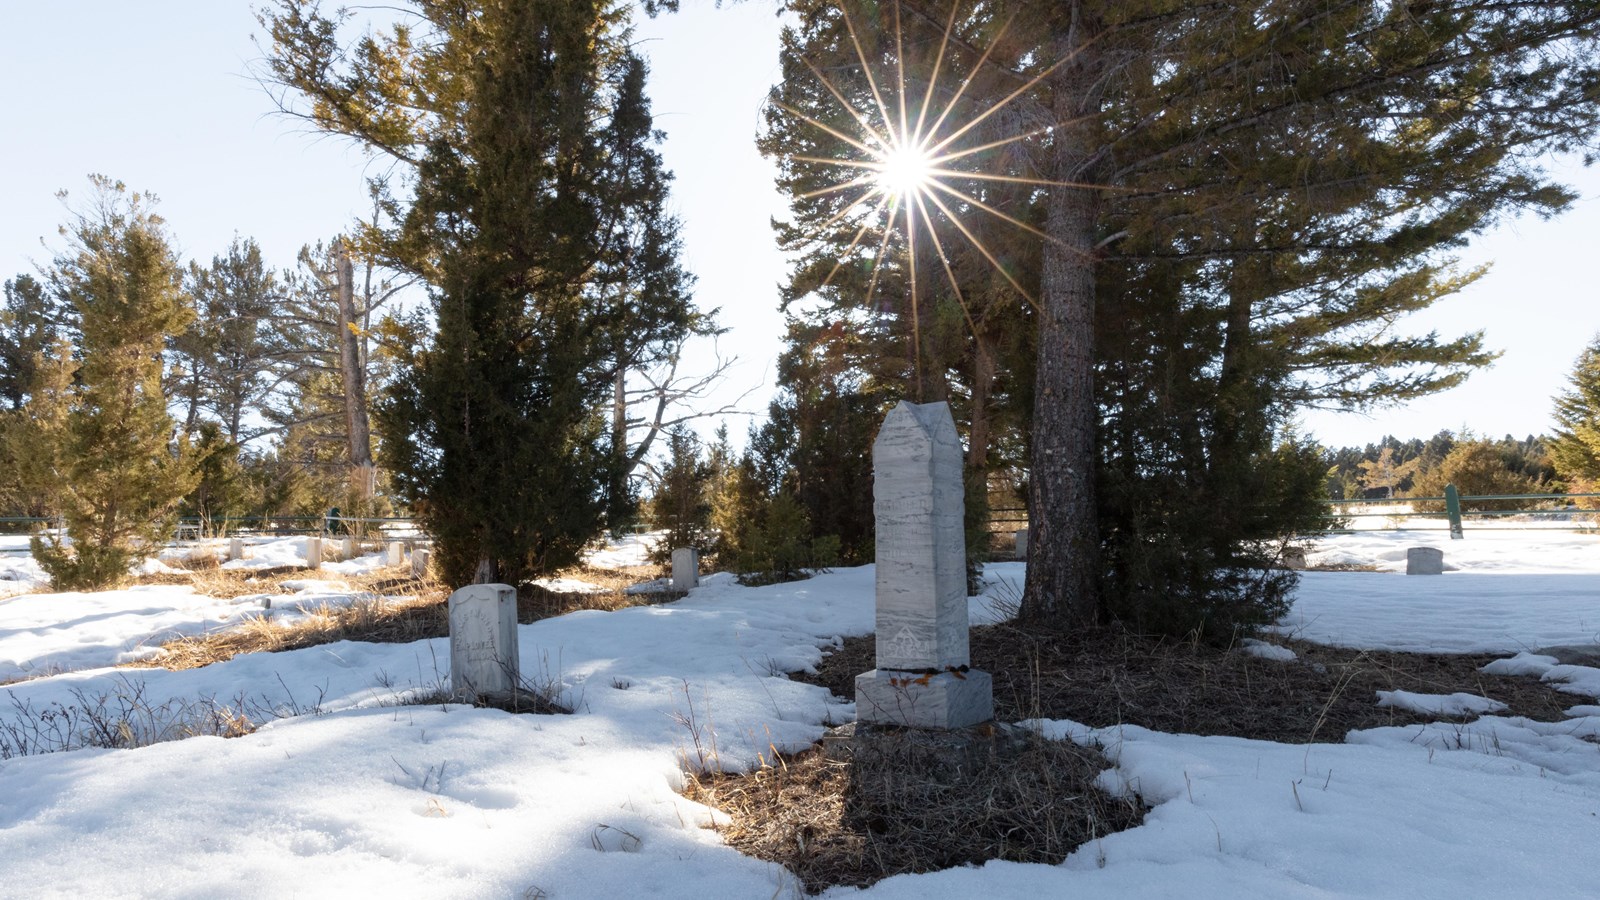 An outdoor cemetery with large trees, short shrubs, headstones, and a green fence covered in snow.